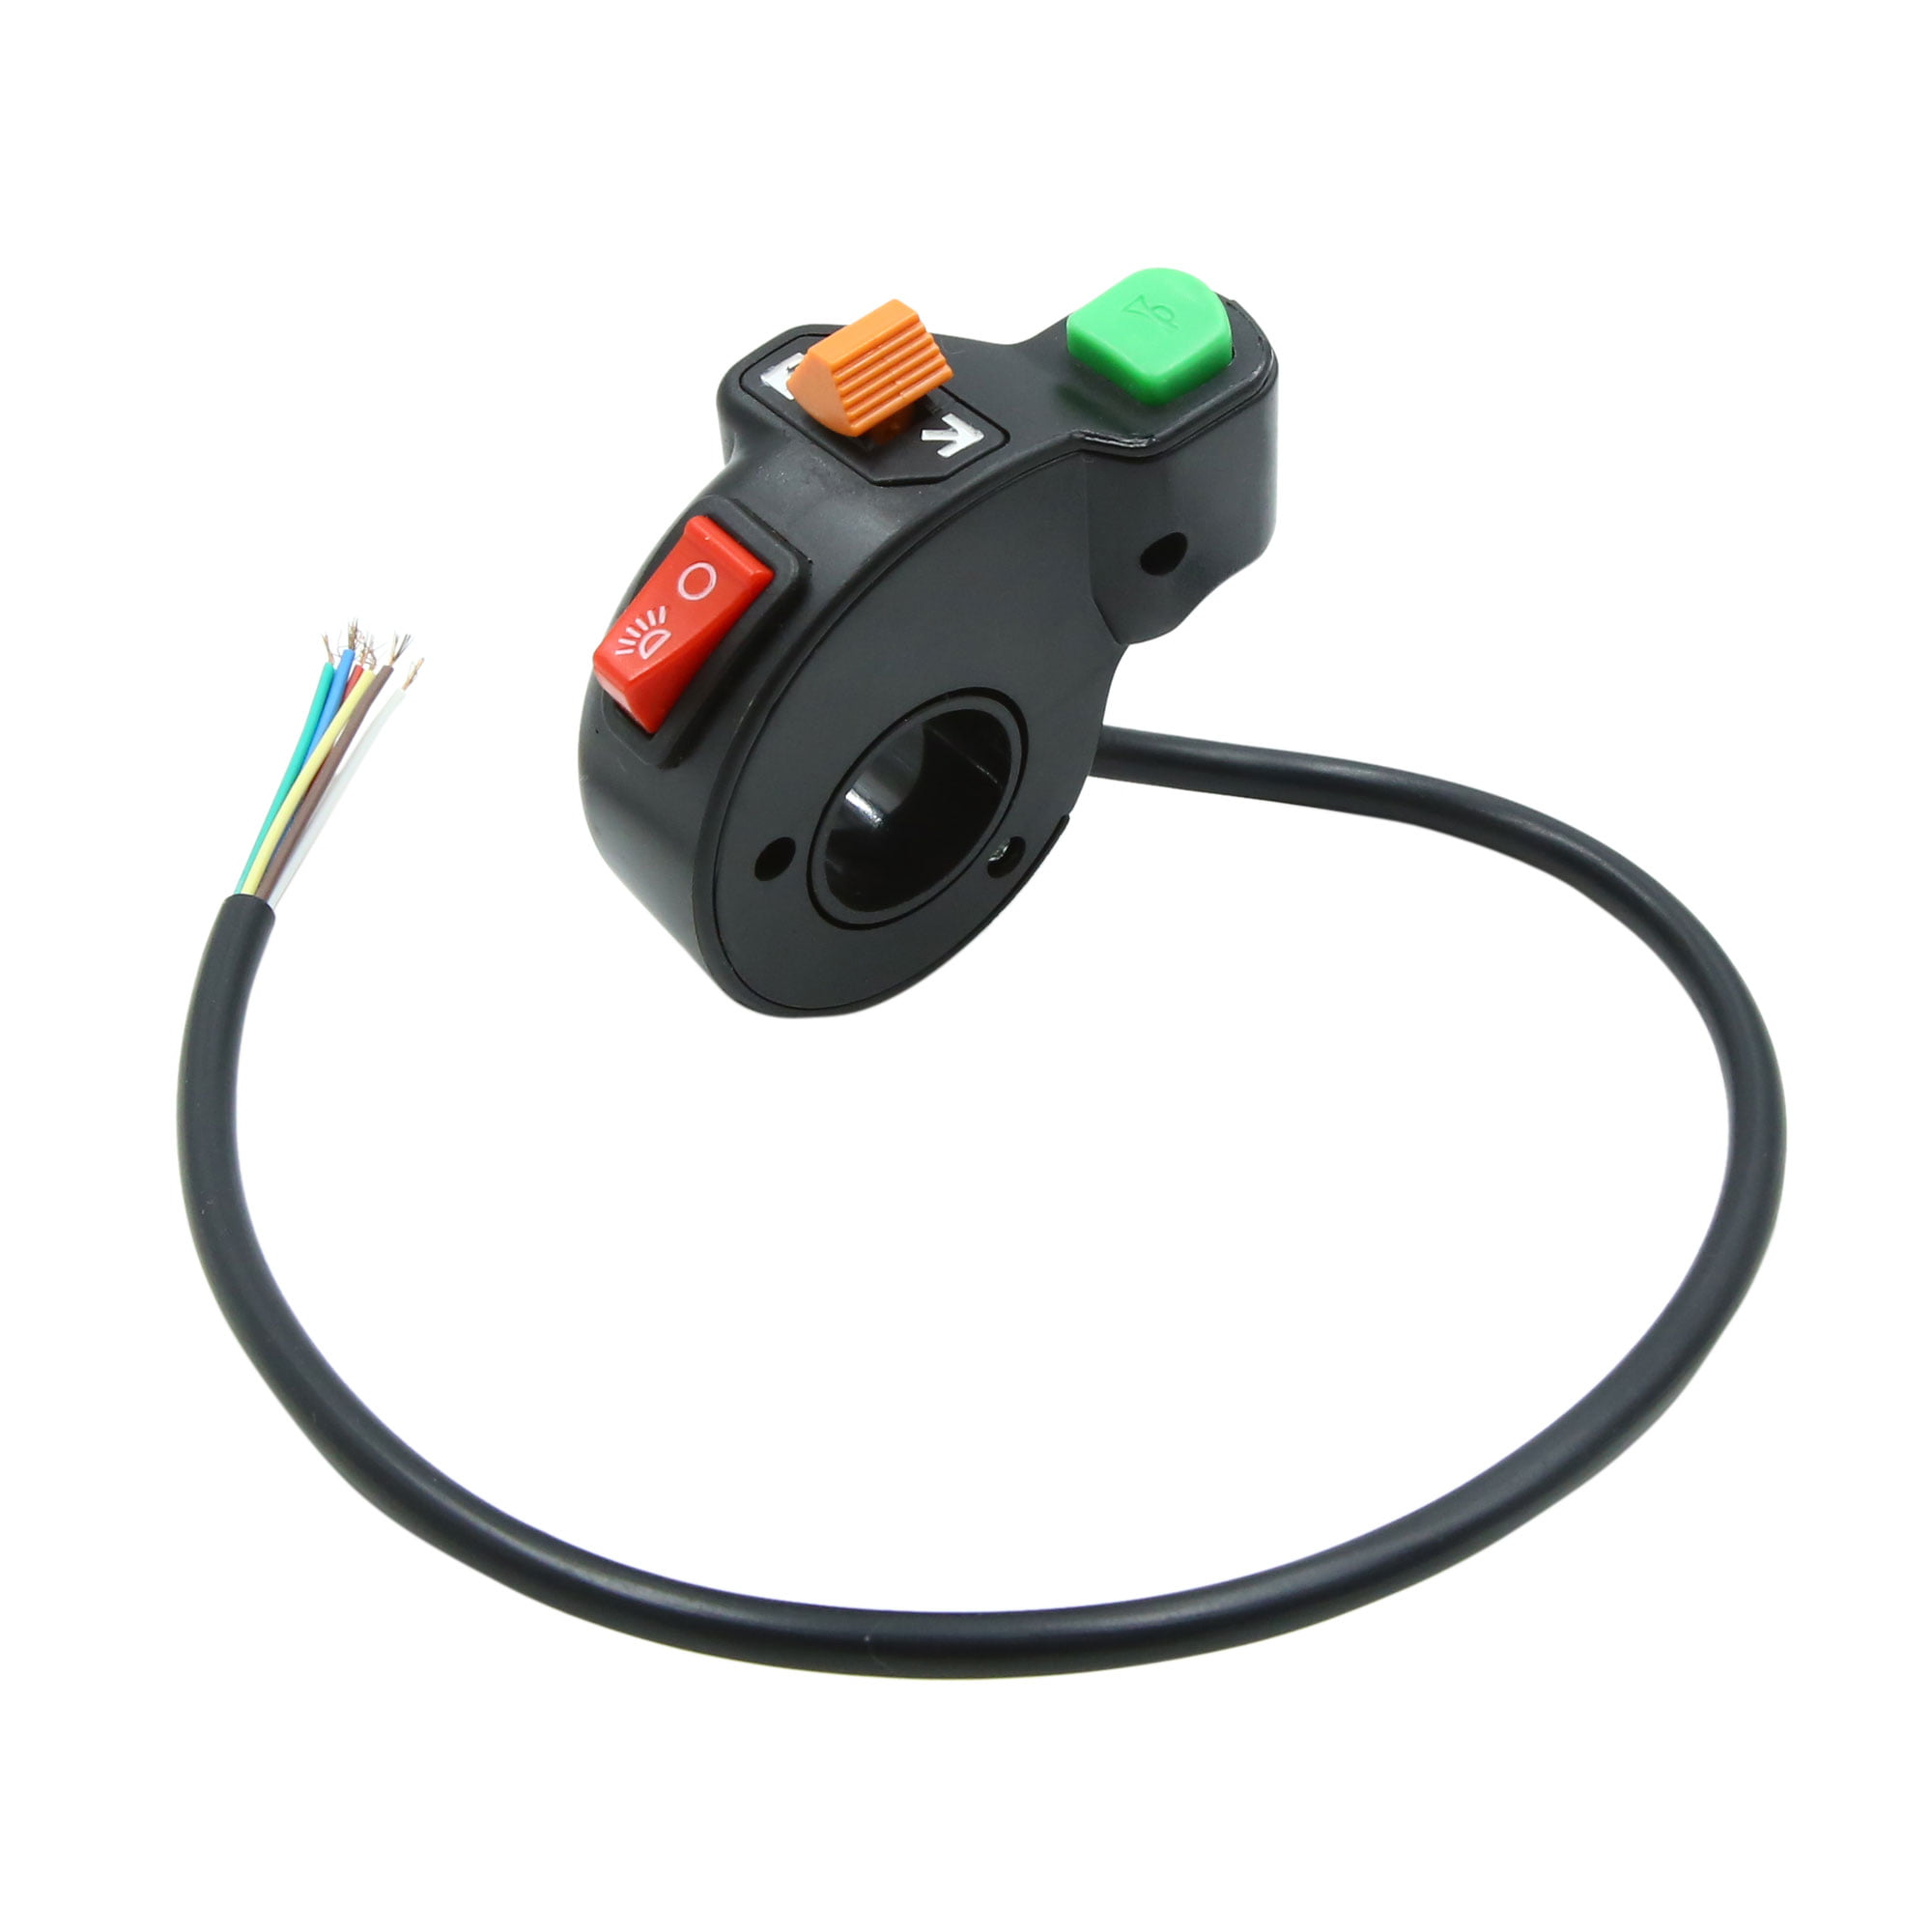 2PCS Universal 7/8 Motorcycle Control Switch Handlebar Switch Left Side and Right Side Horn Turn Signal Lights Electrical Start Switch